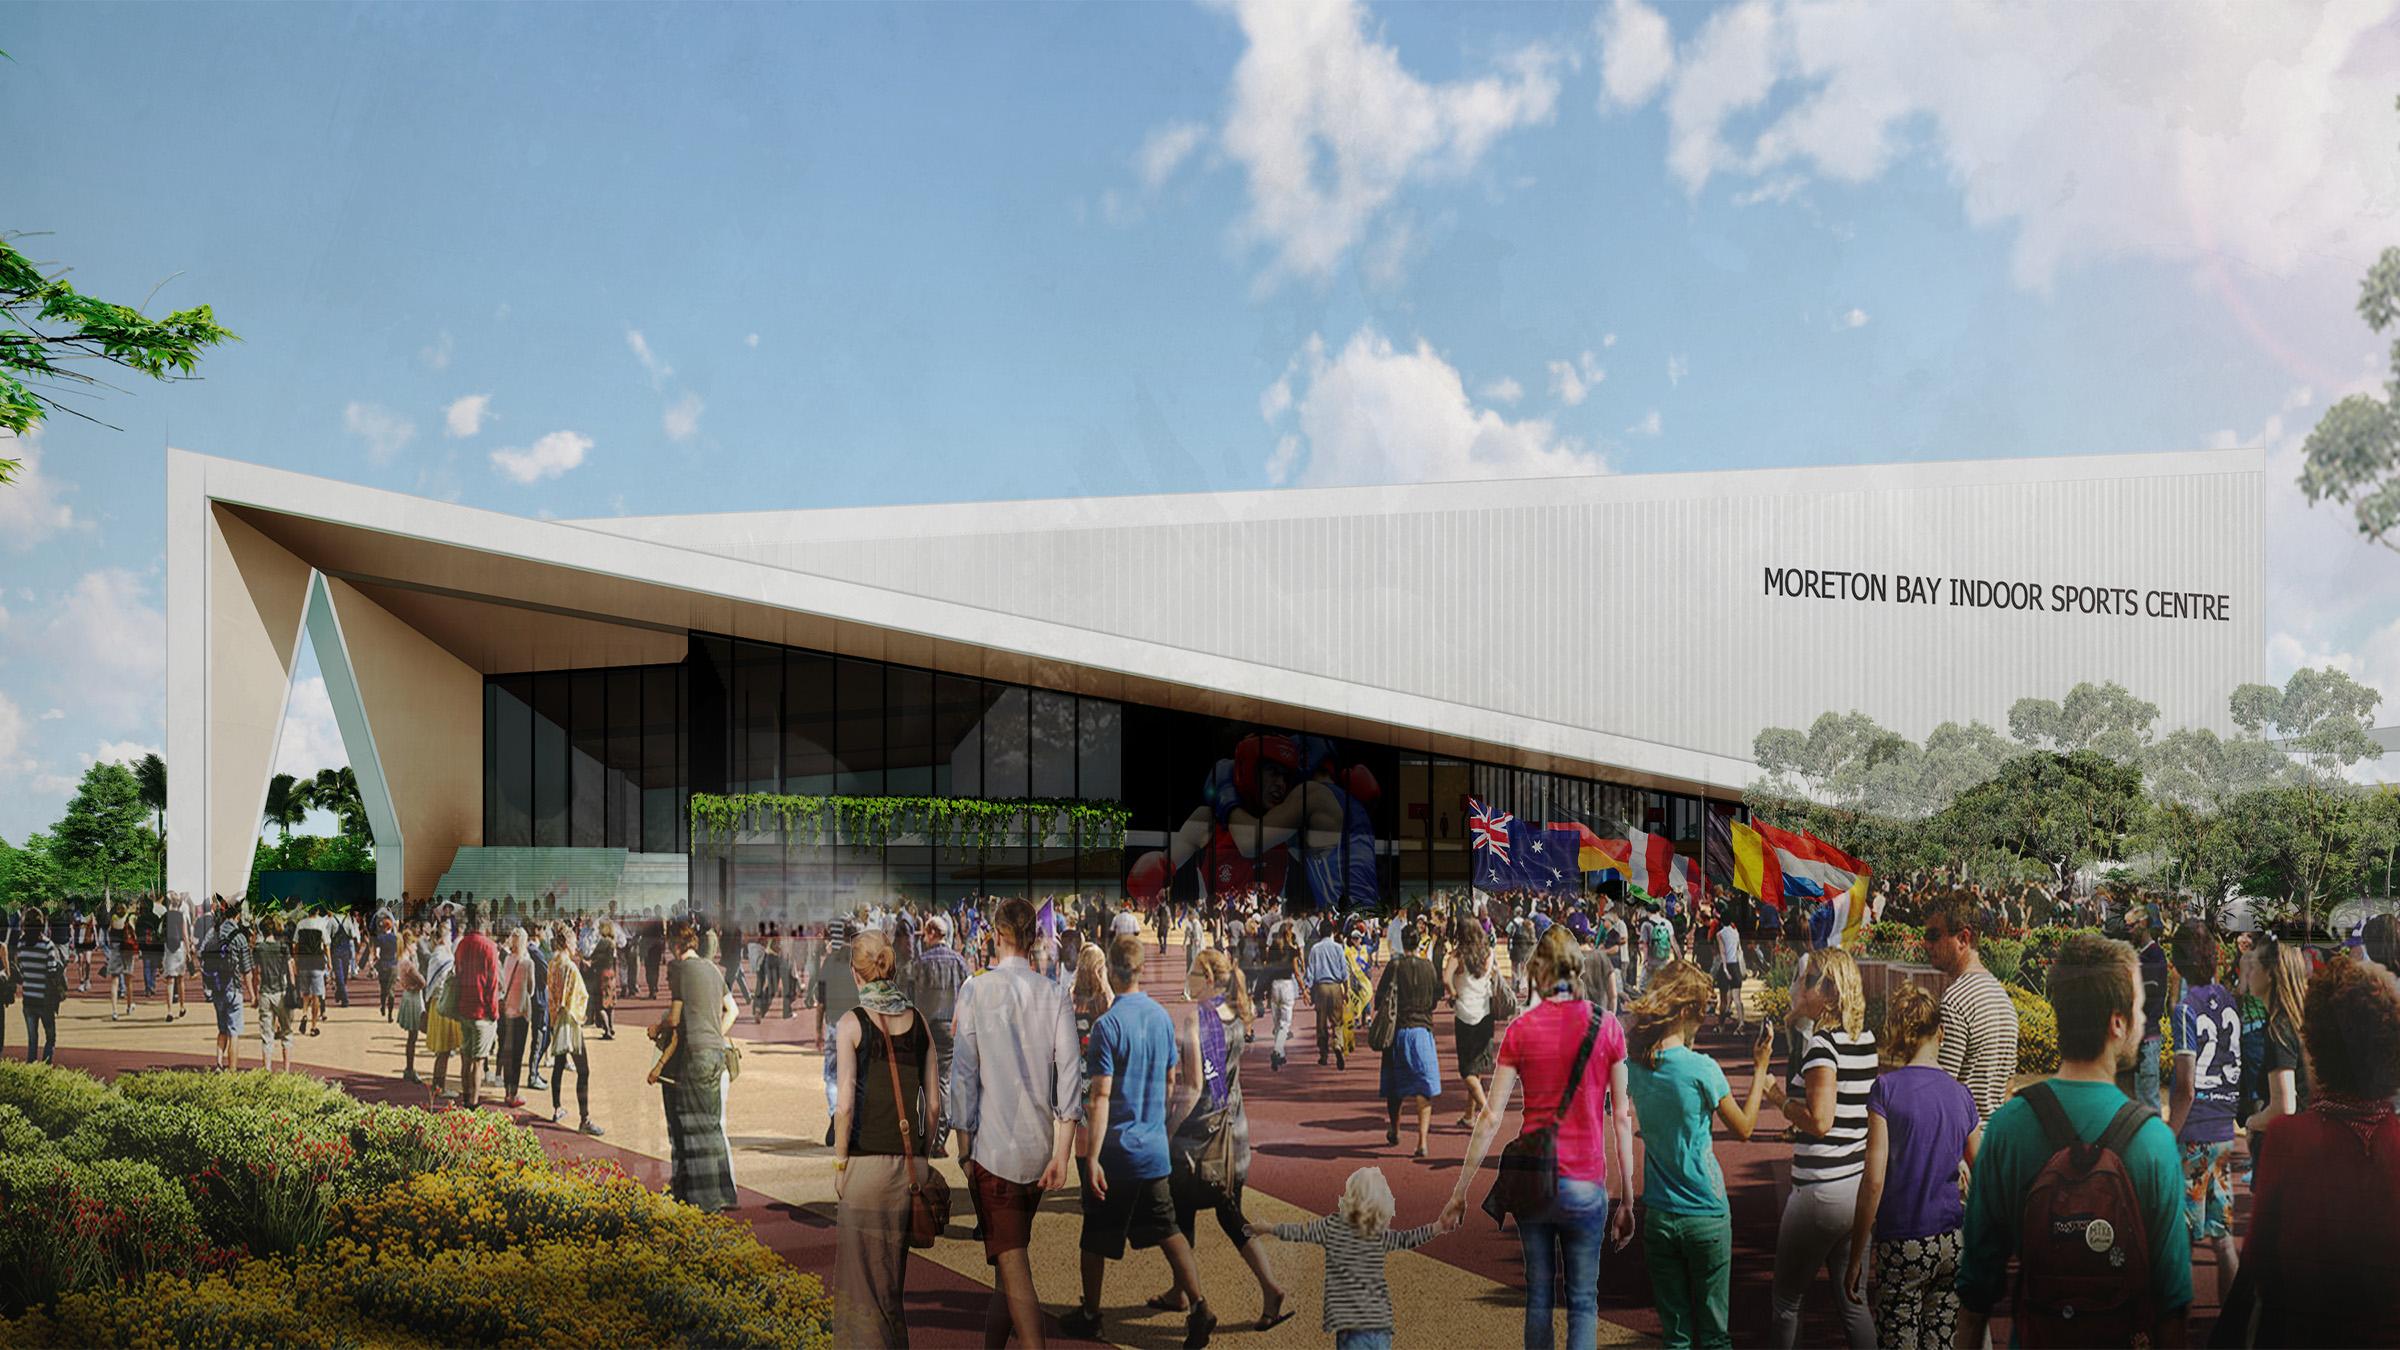 Computer-render of large crowds walking into the Moreton Bay Indoor sports centre